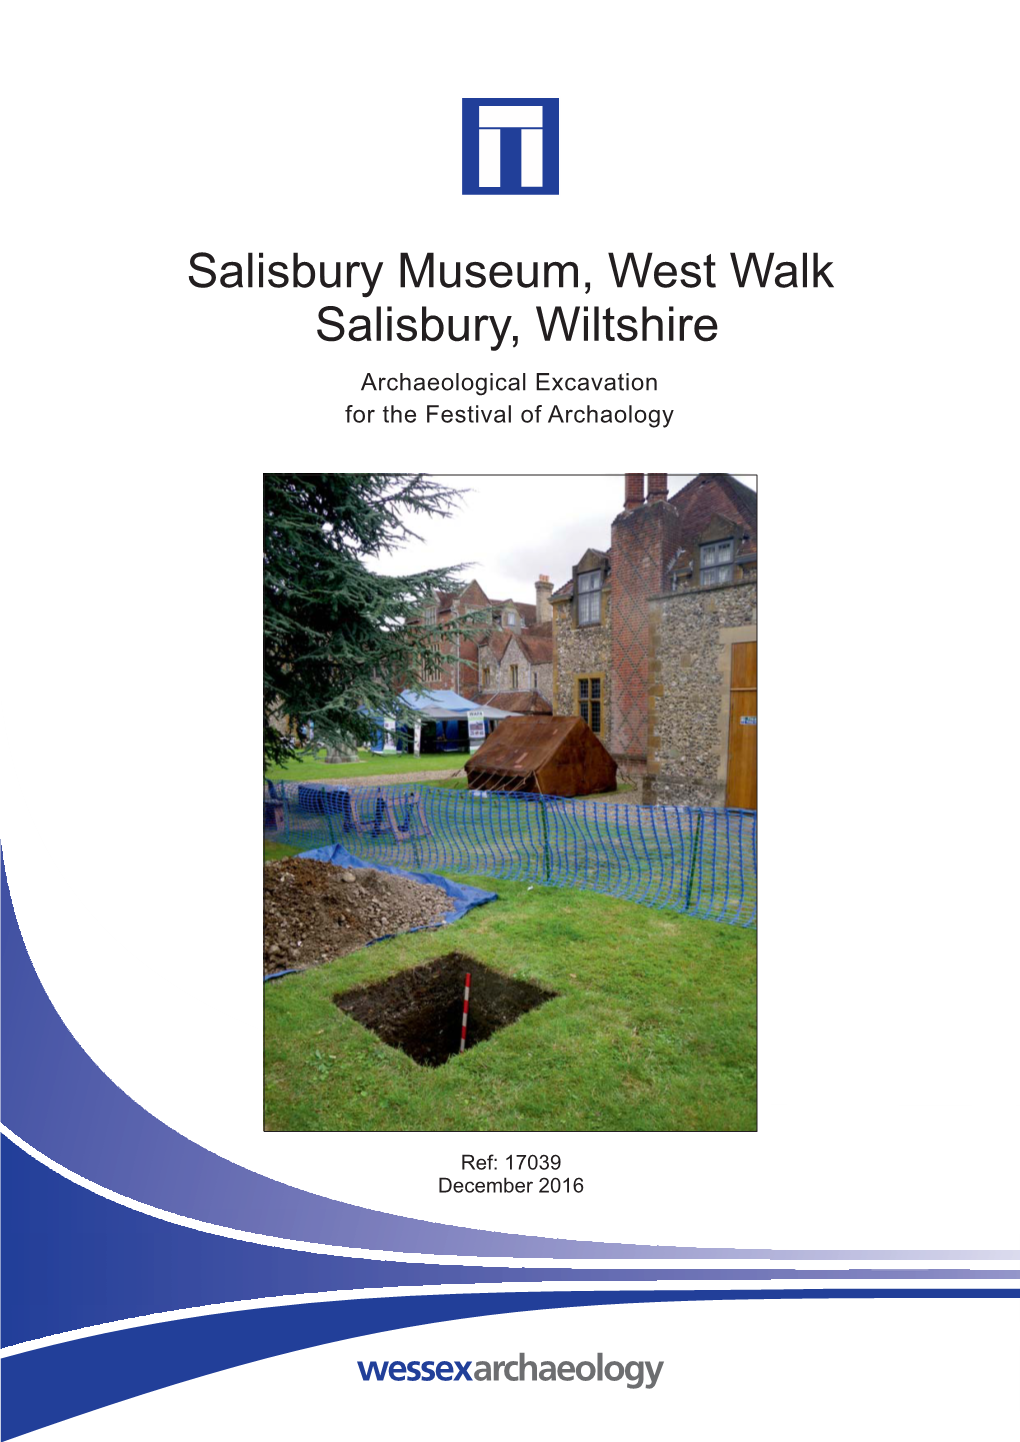 Salisbury Museum, West Walk Salisbury, Wiltshire Archaeological Excavation for the Festival of Archaology